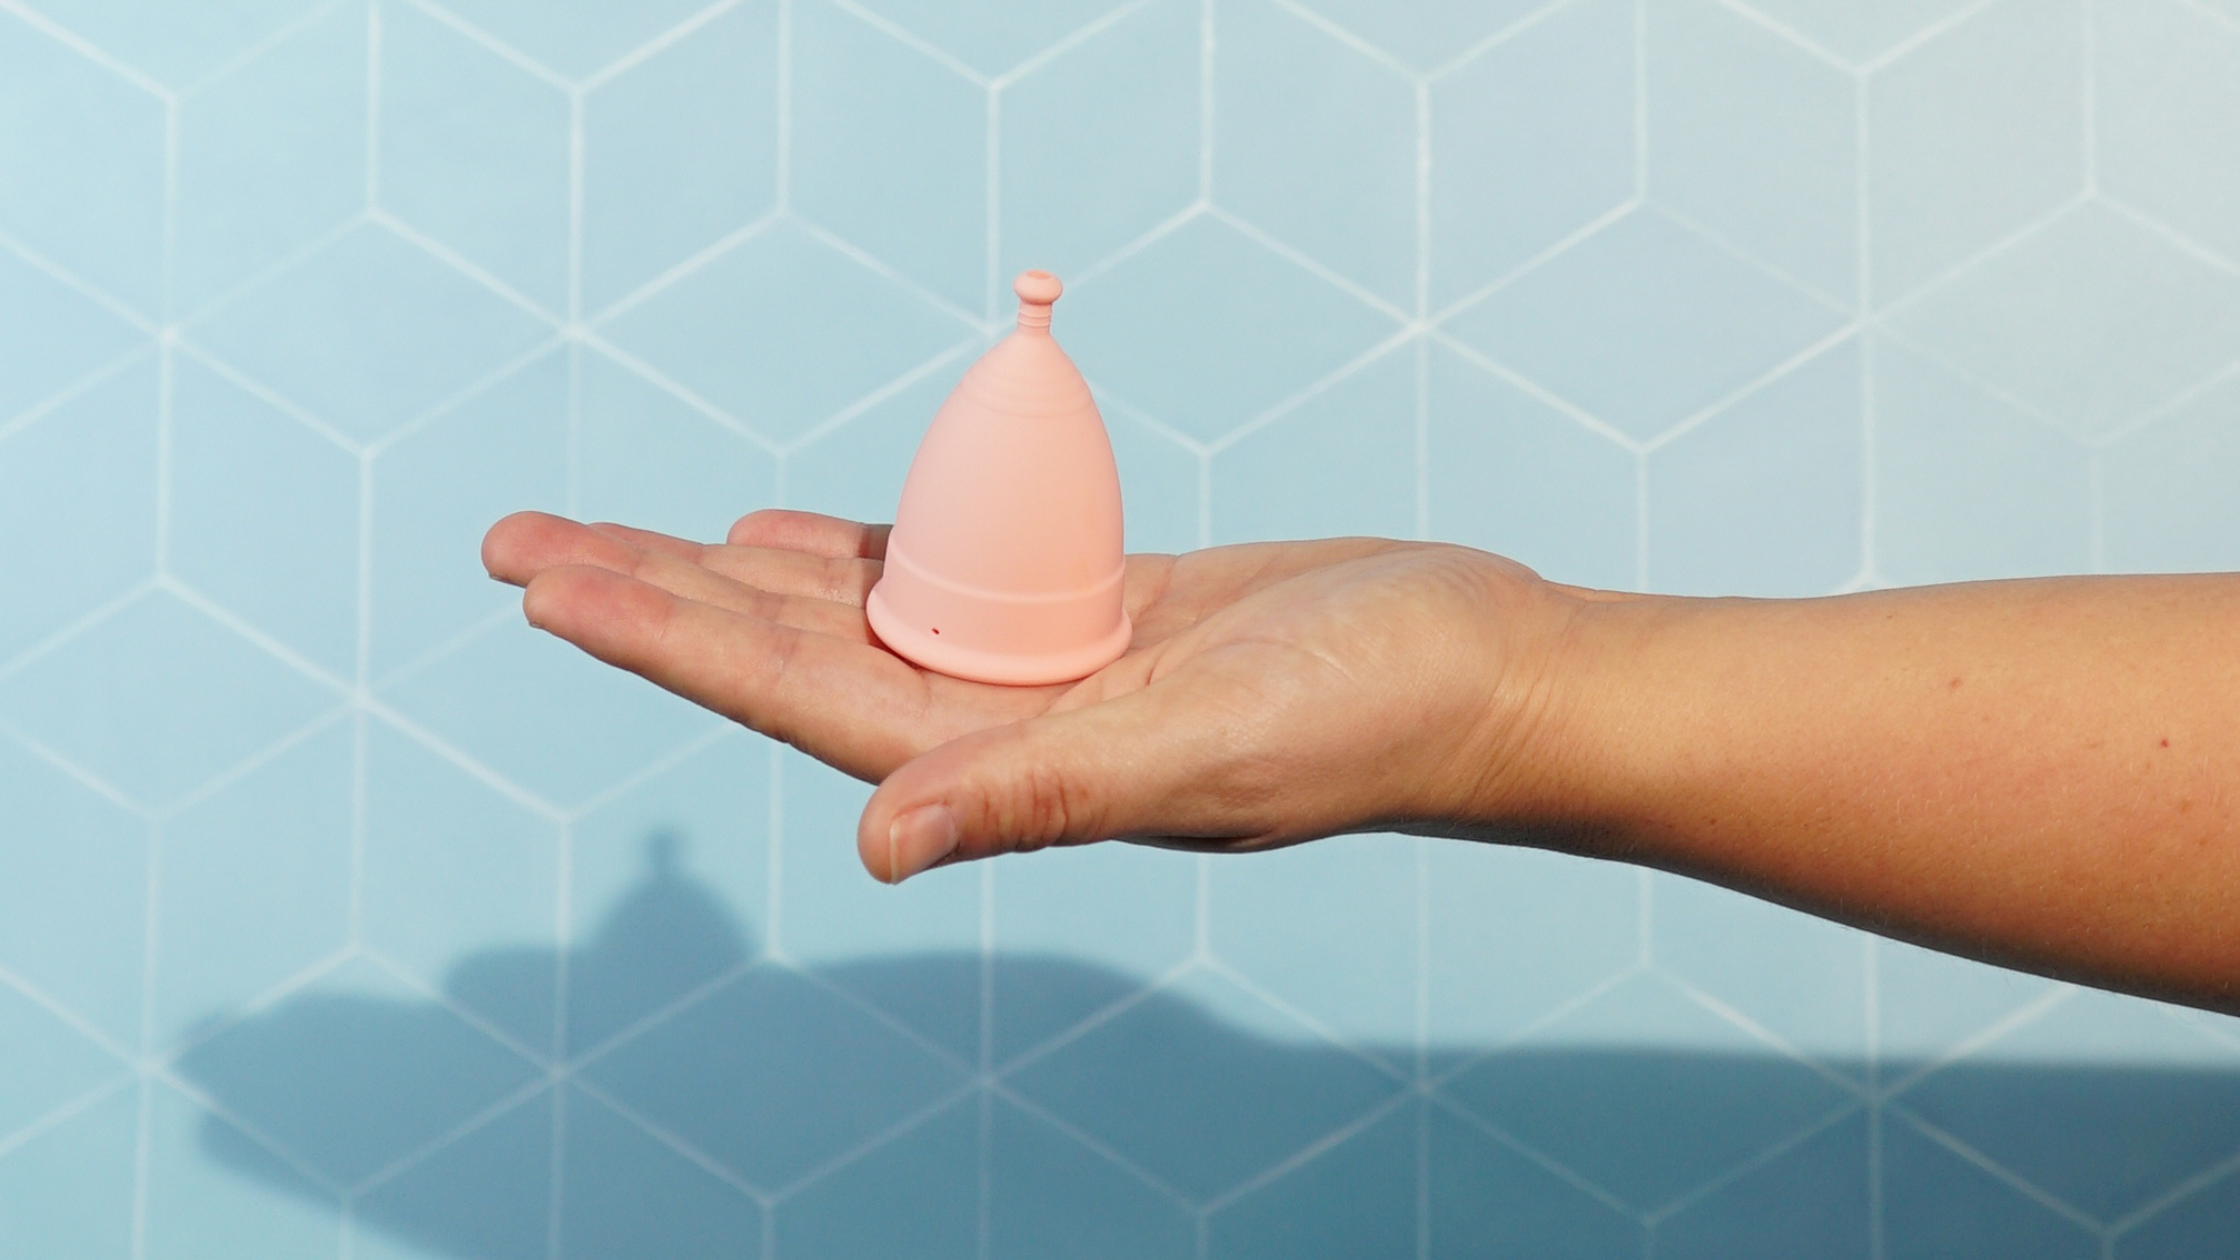 Why does my menstrual cup hurt?